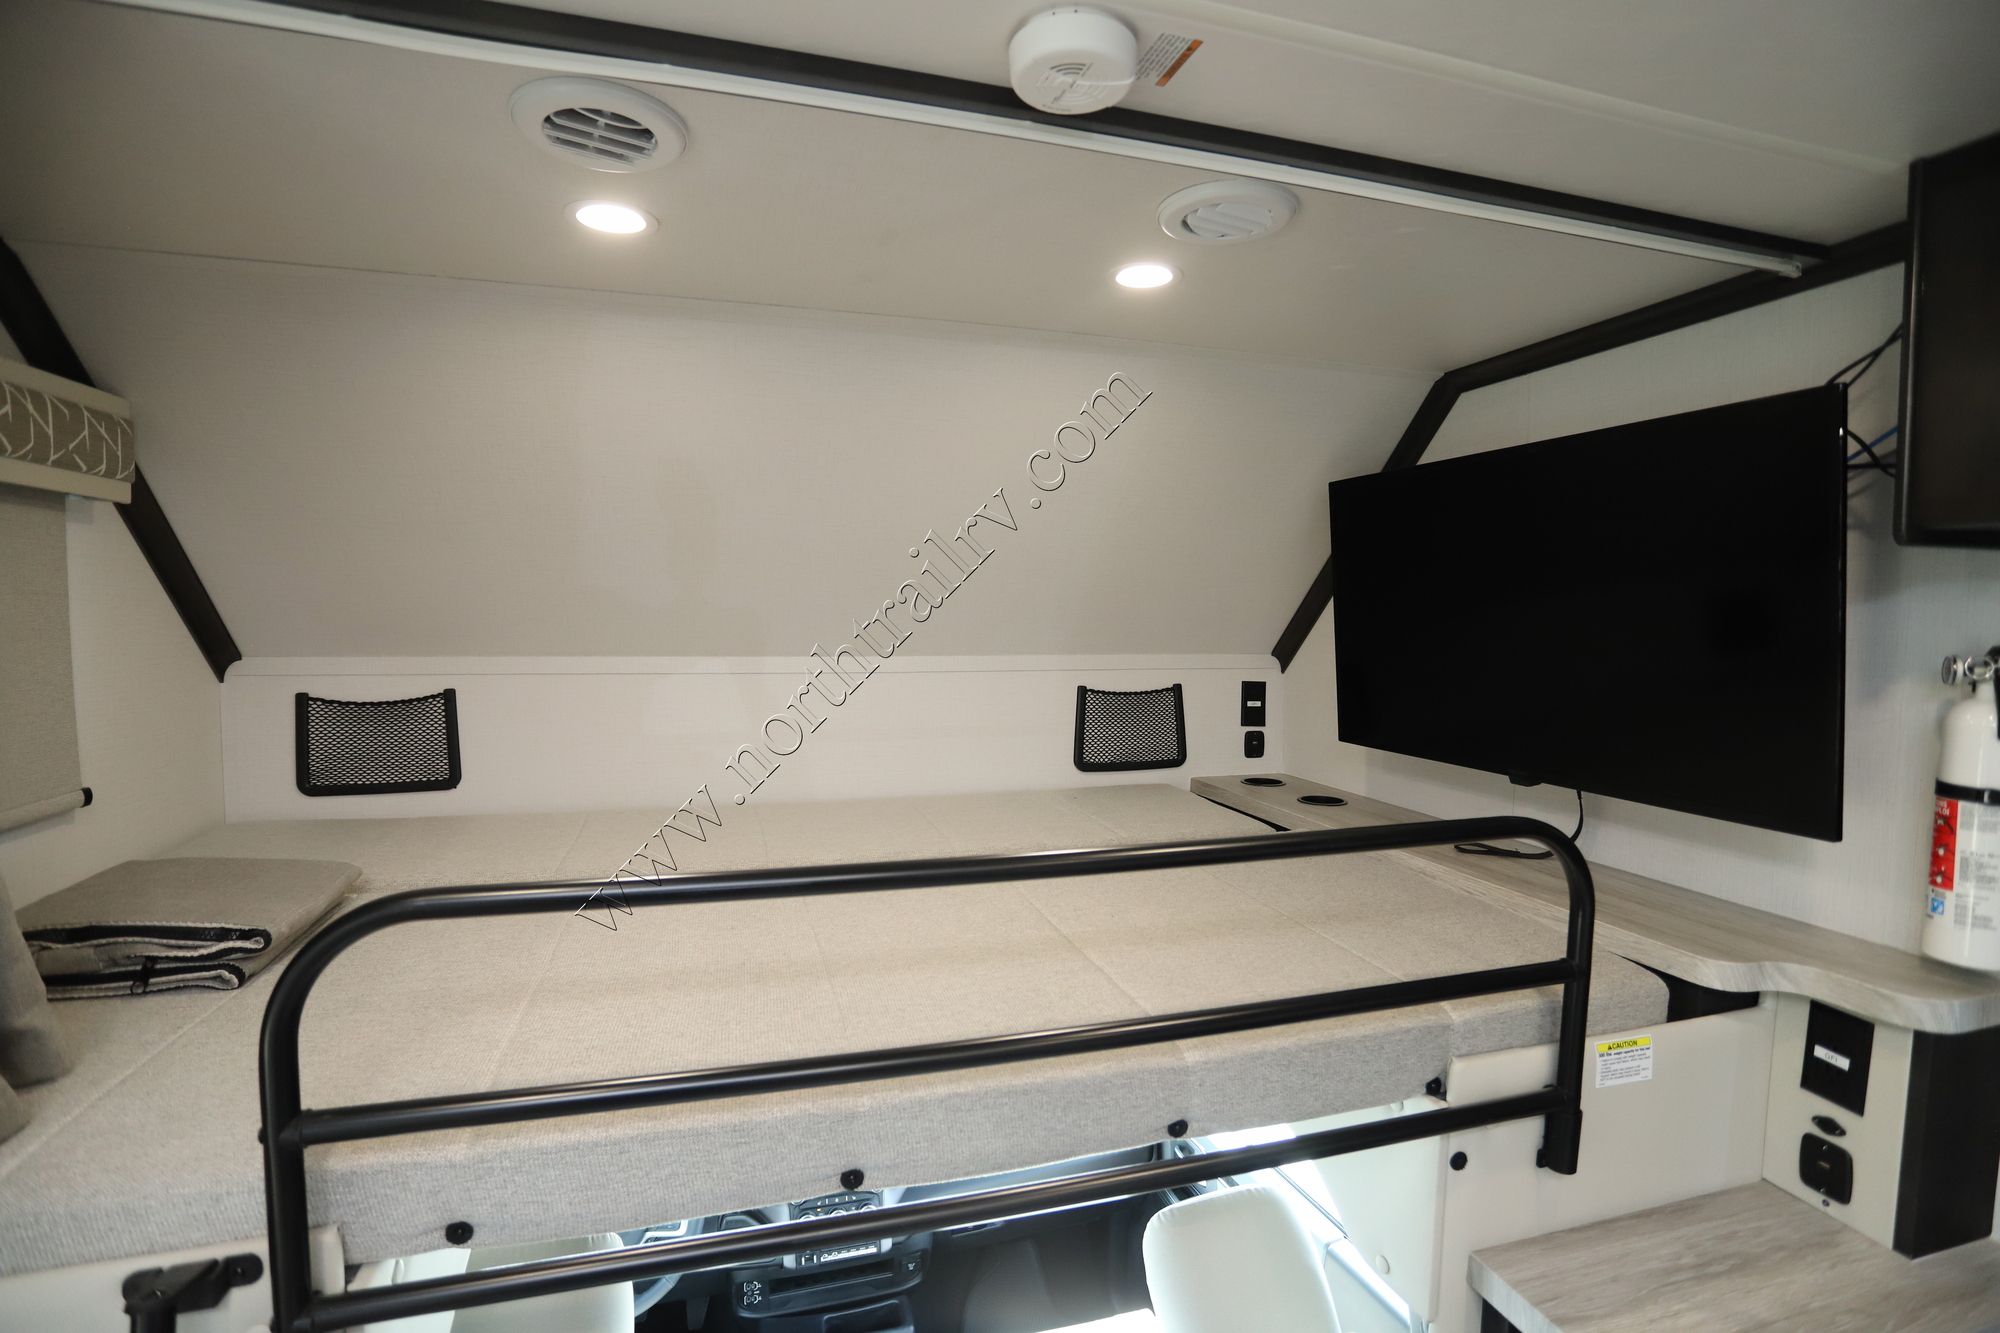 New 2025 Dynamax Isata 5 30FWD Super C  For Sale